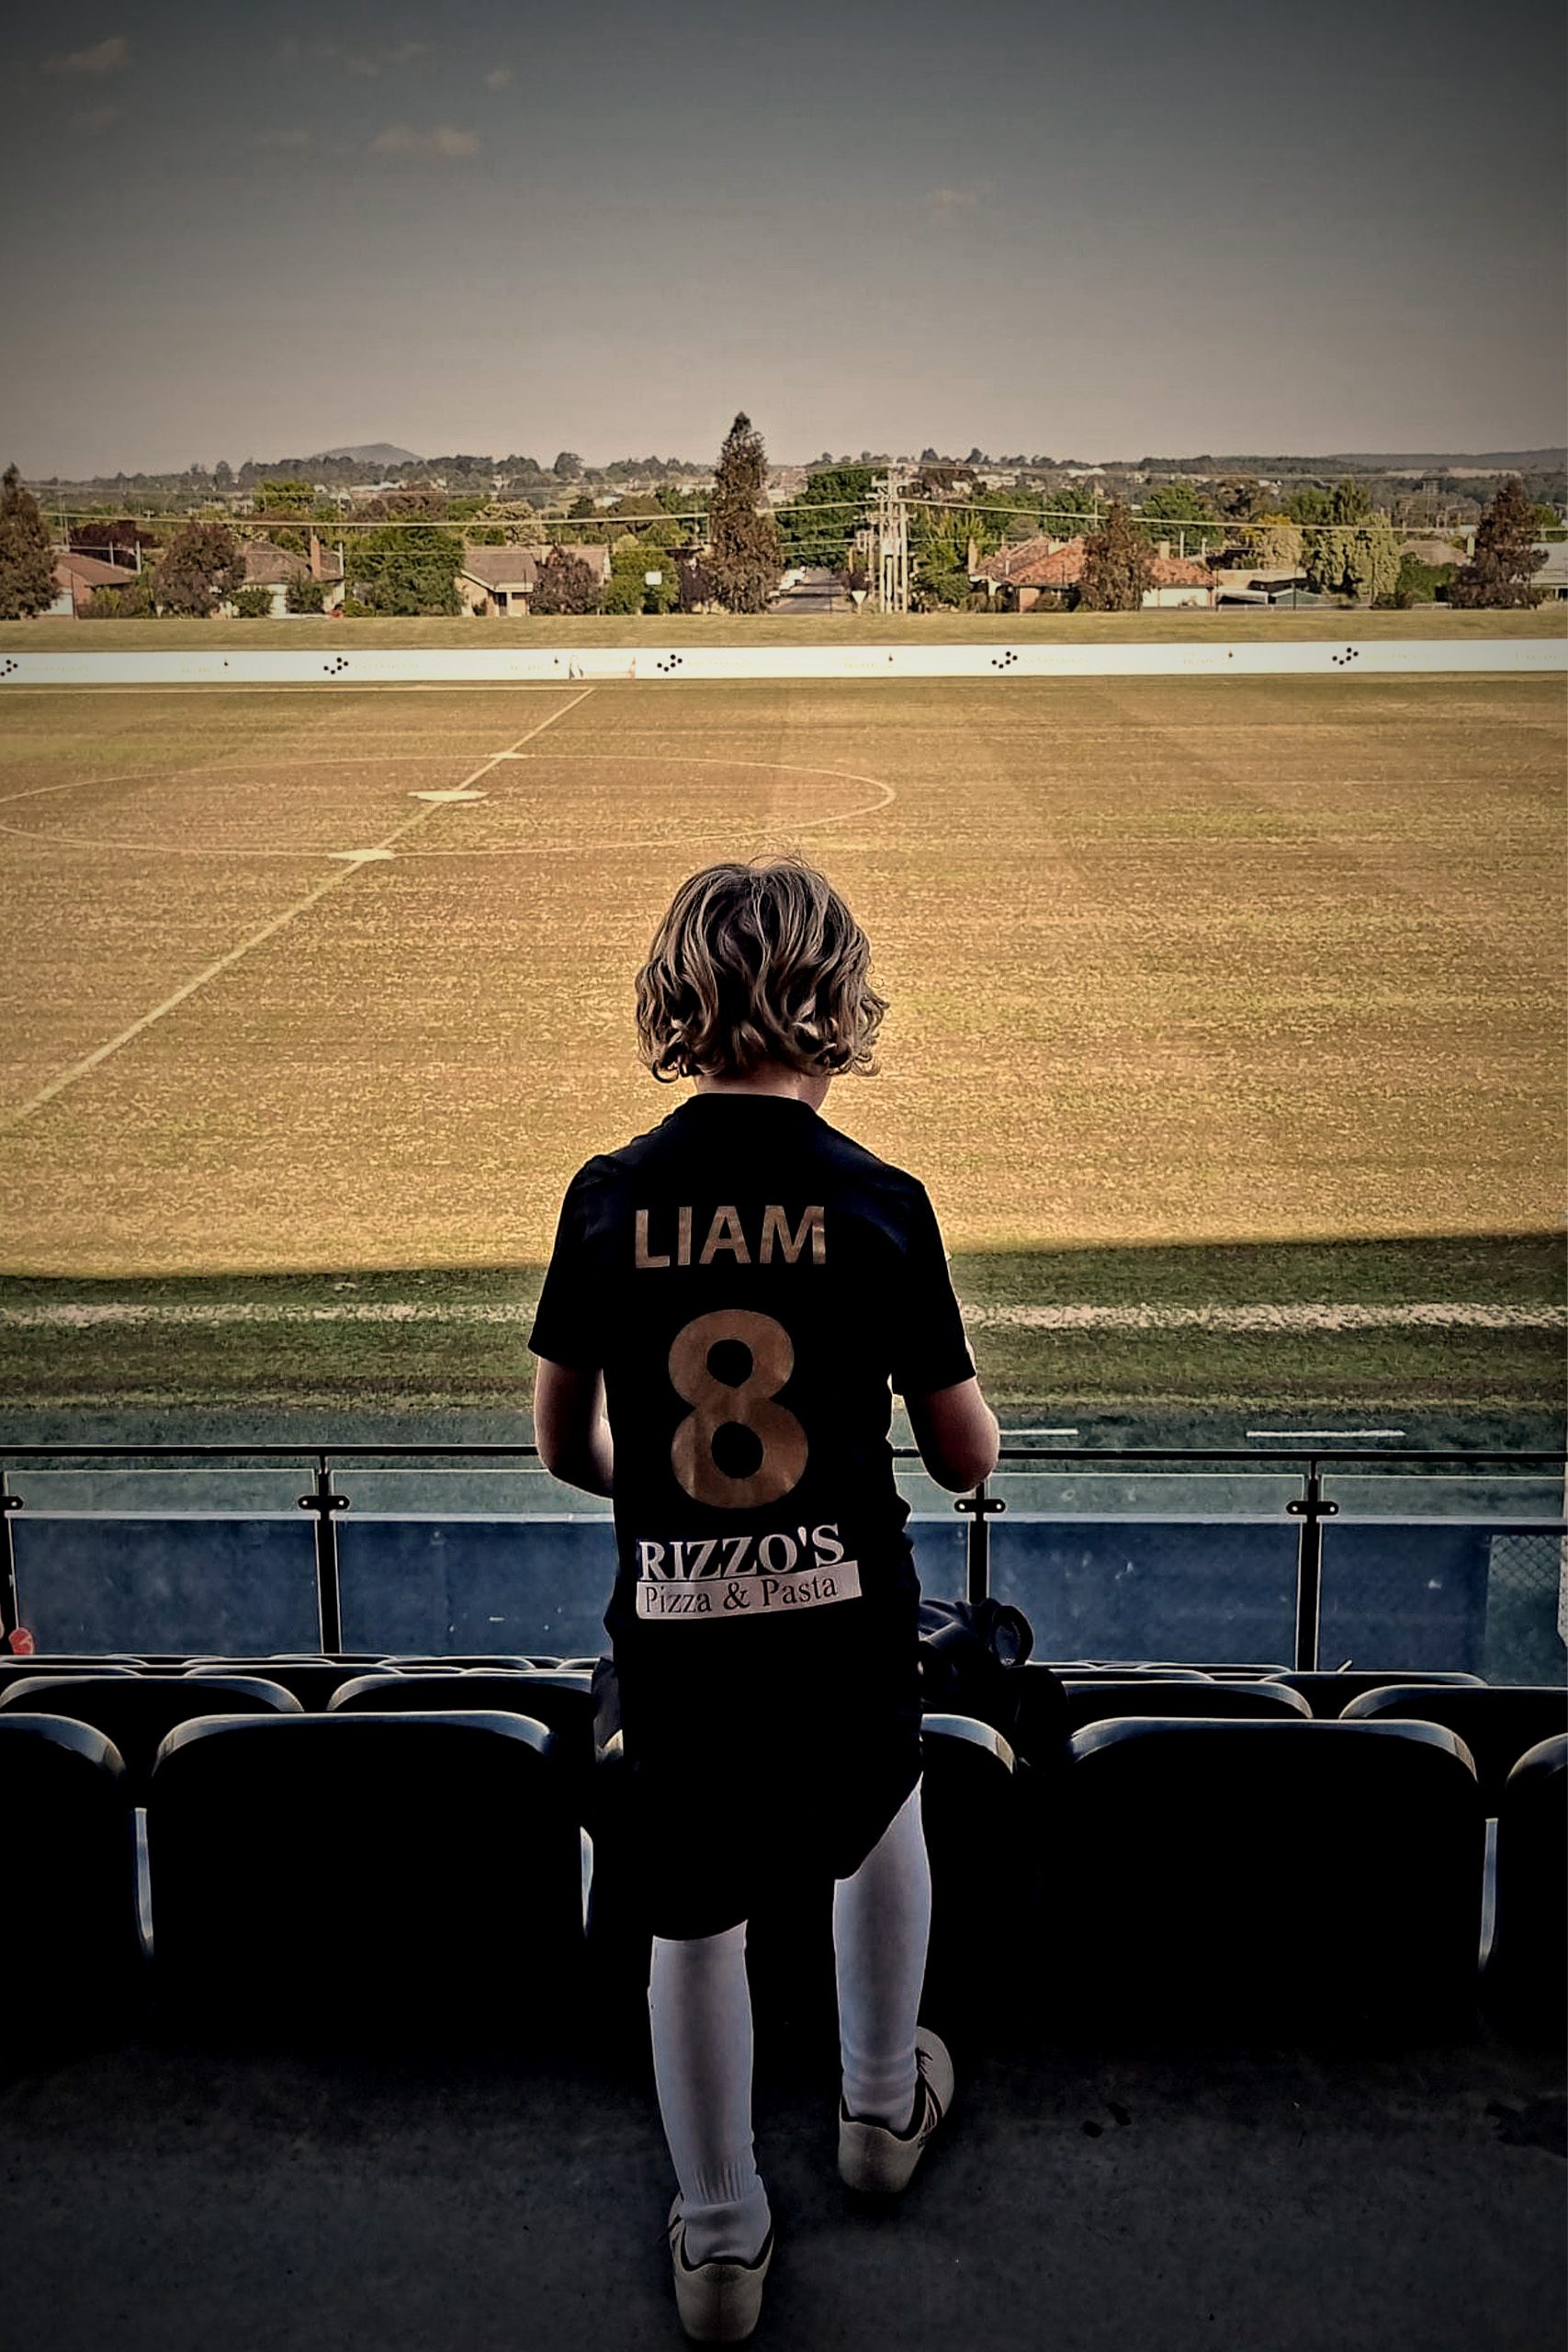 Liam 8 - Looking at field from stands